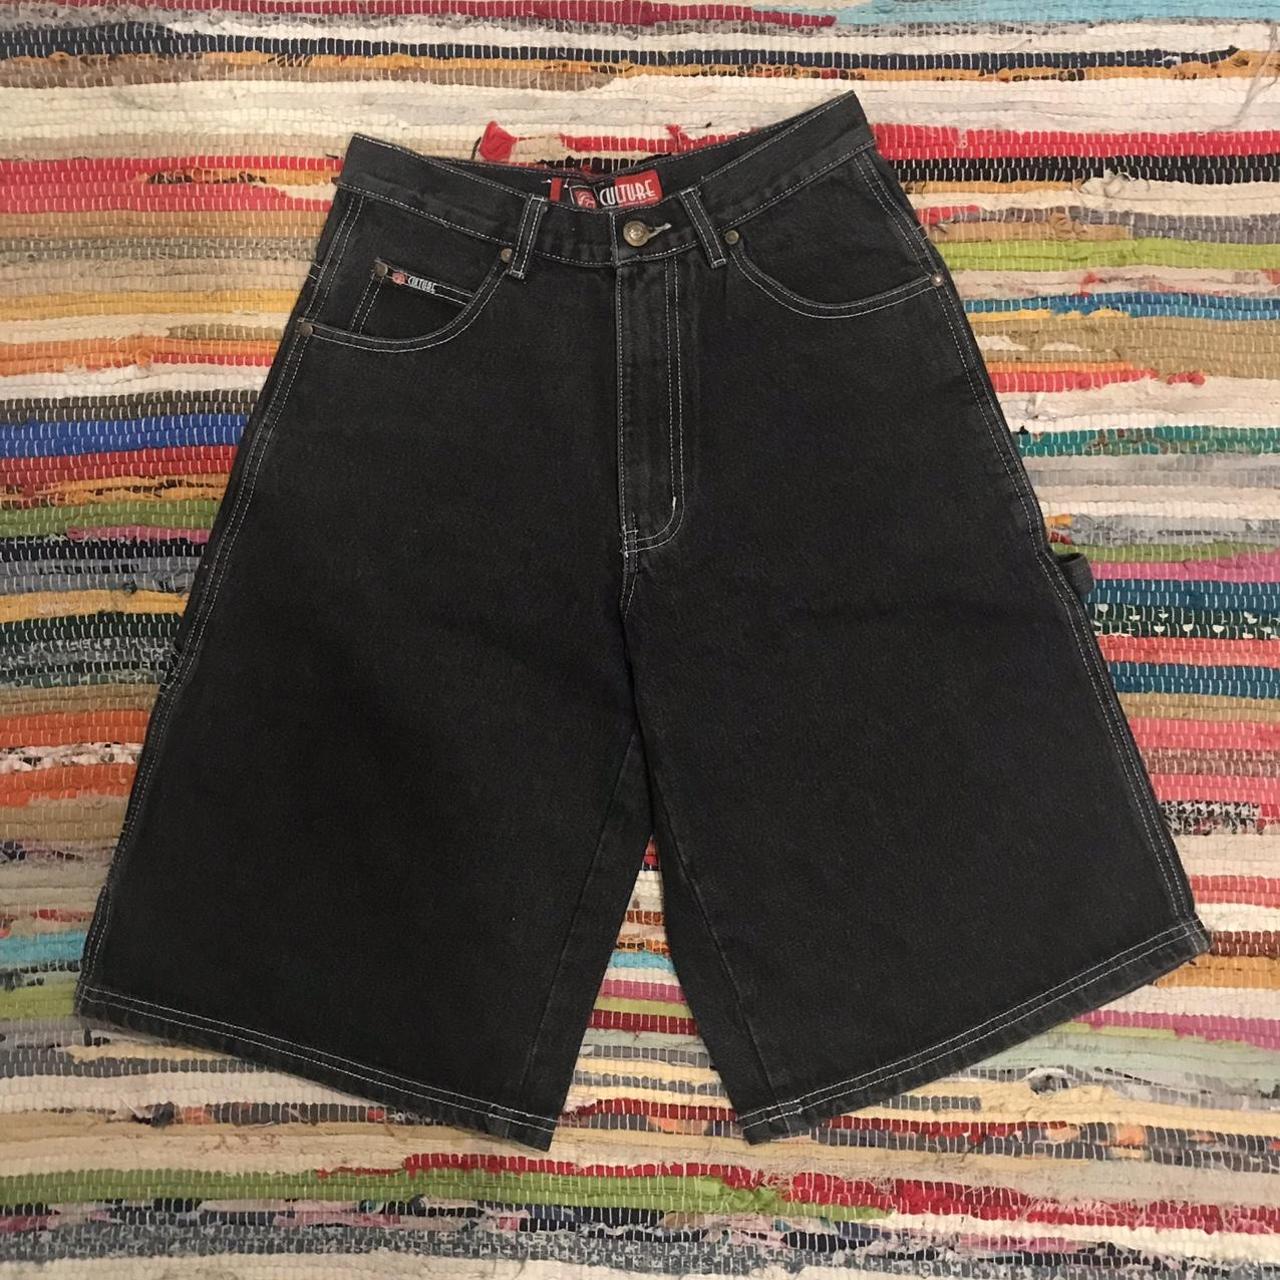 baggy jnco style jorts (brand culture jeans. never... - Depop